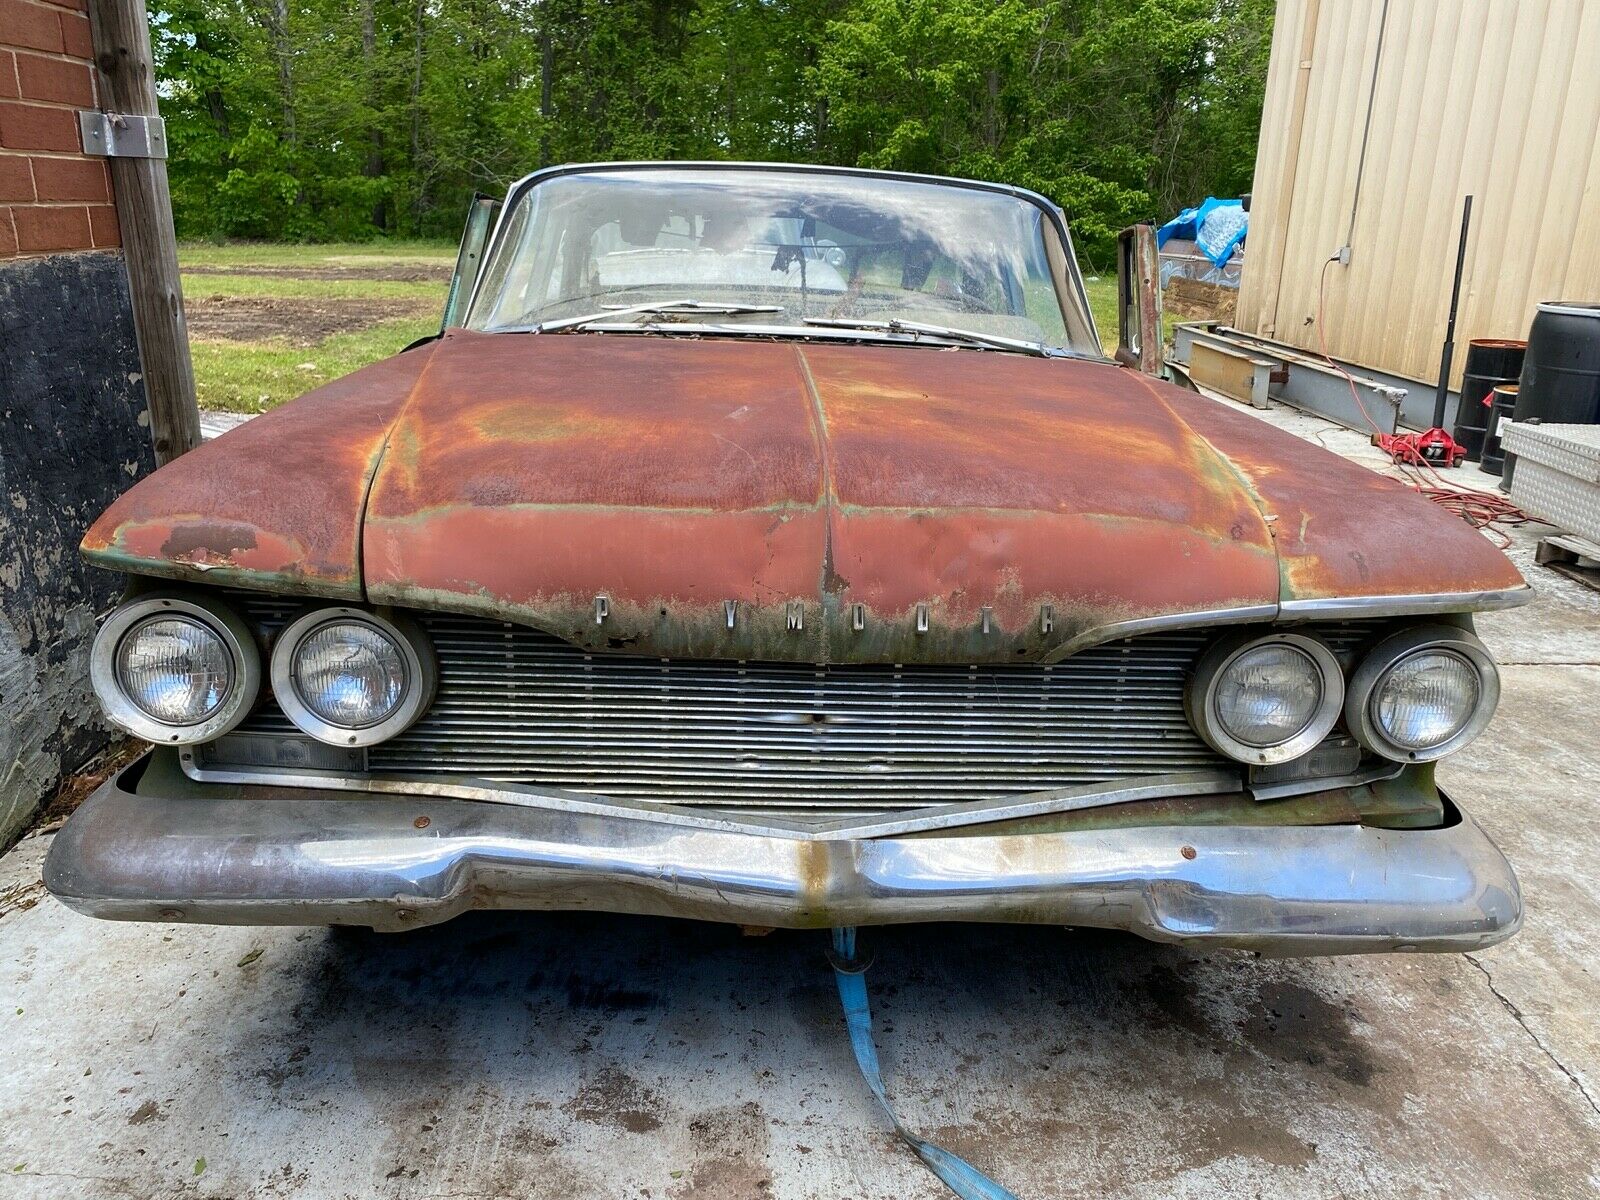 Weird, Rusty, Slow, and Rare: This Factory Perkins Diesel Powered 1960 Plymouth Belvedere Is Awesome